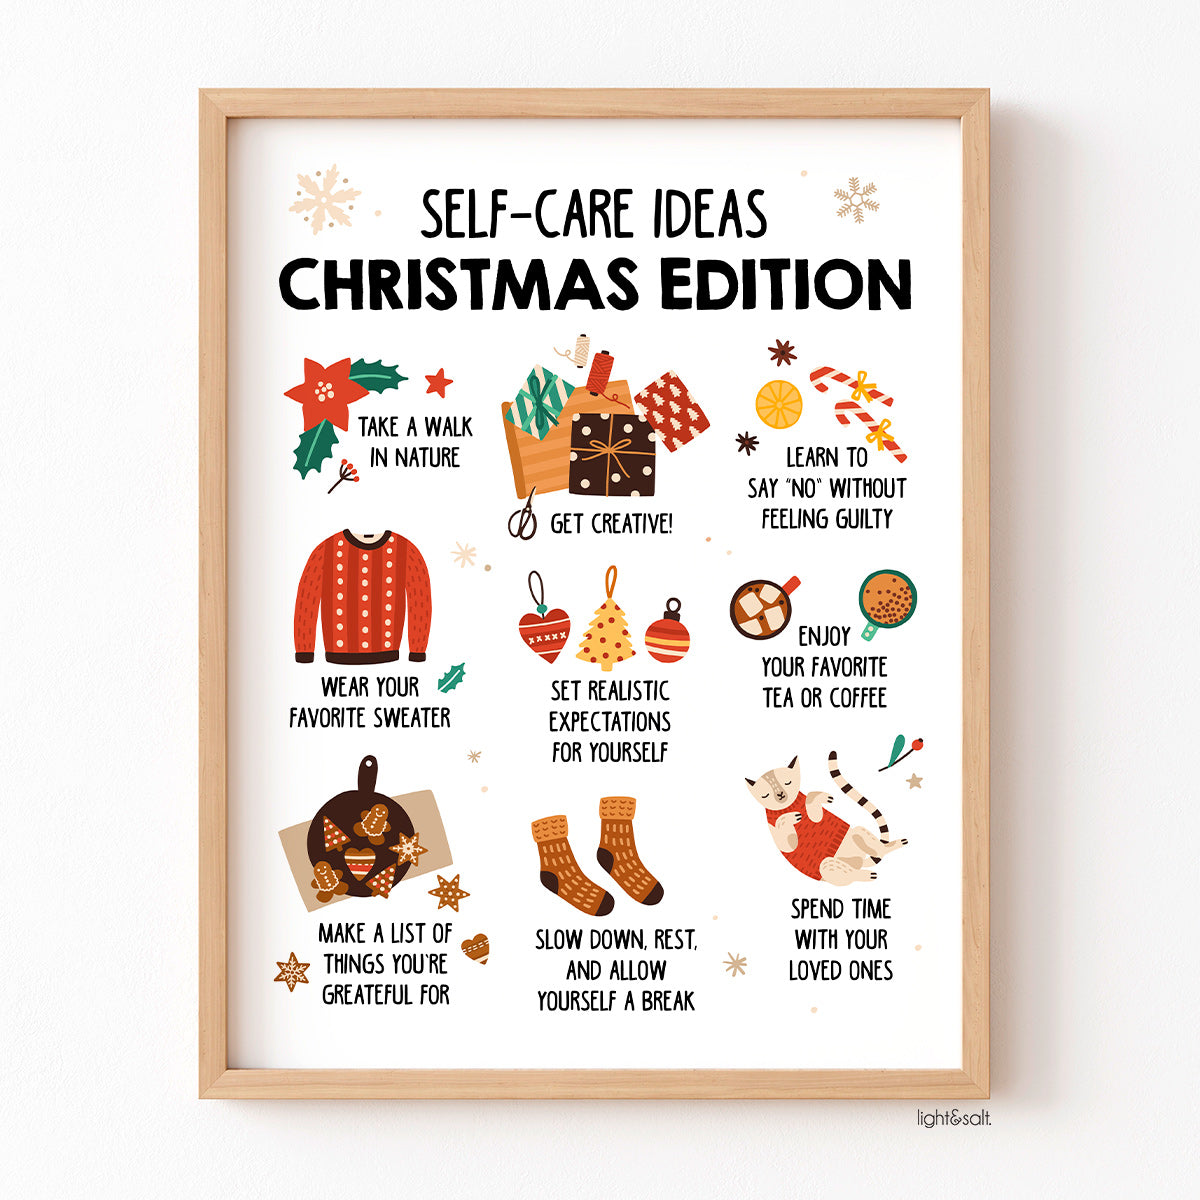 Self care ideas christmas edition poster